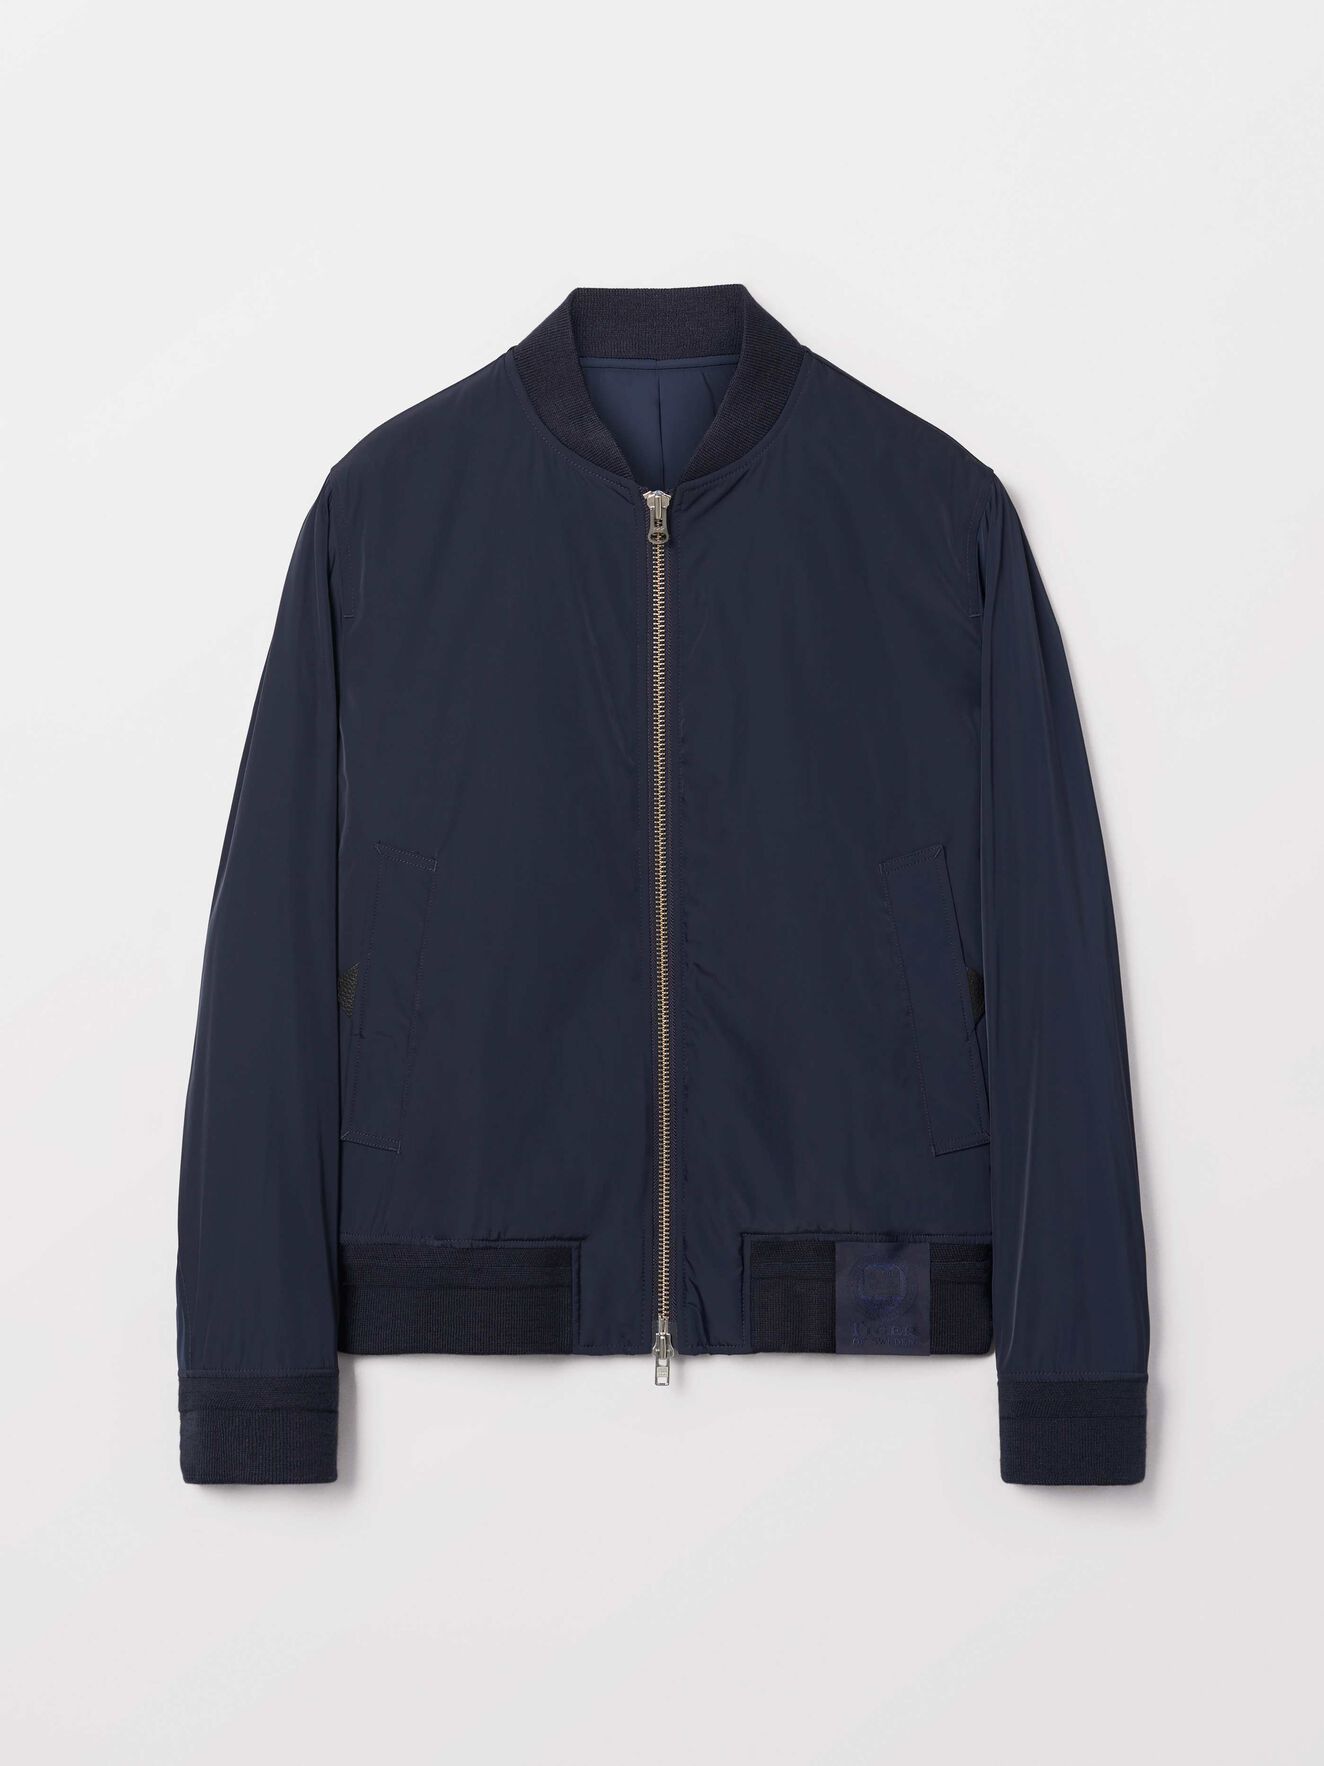 Orland Jacket - Buy Outerwear online